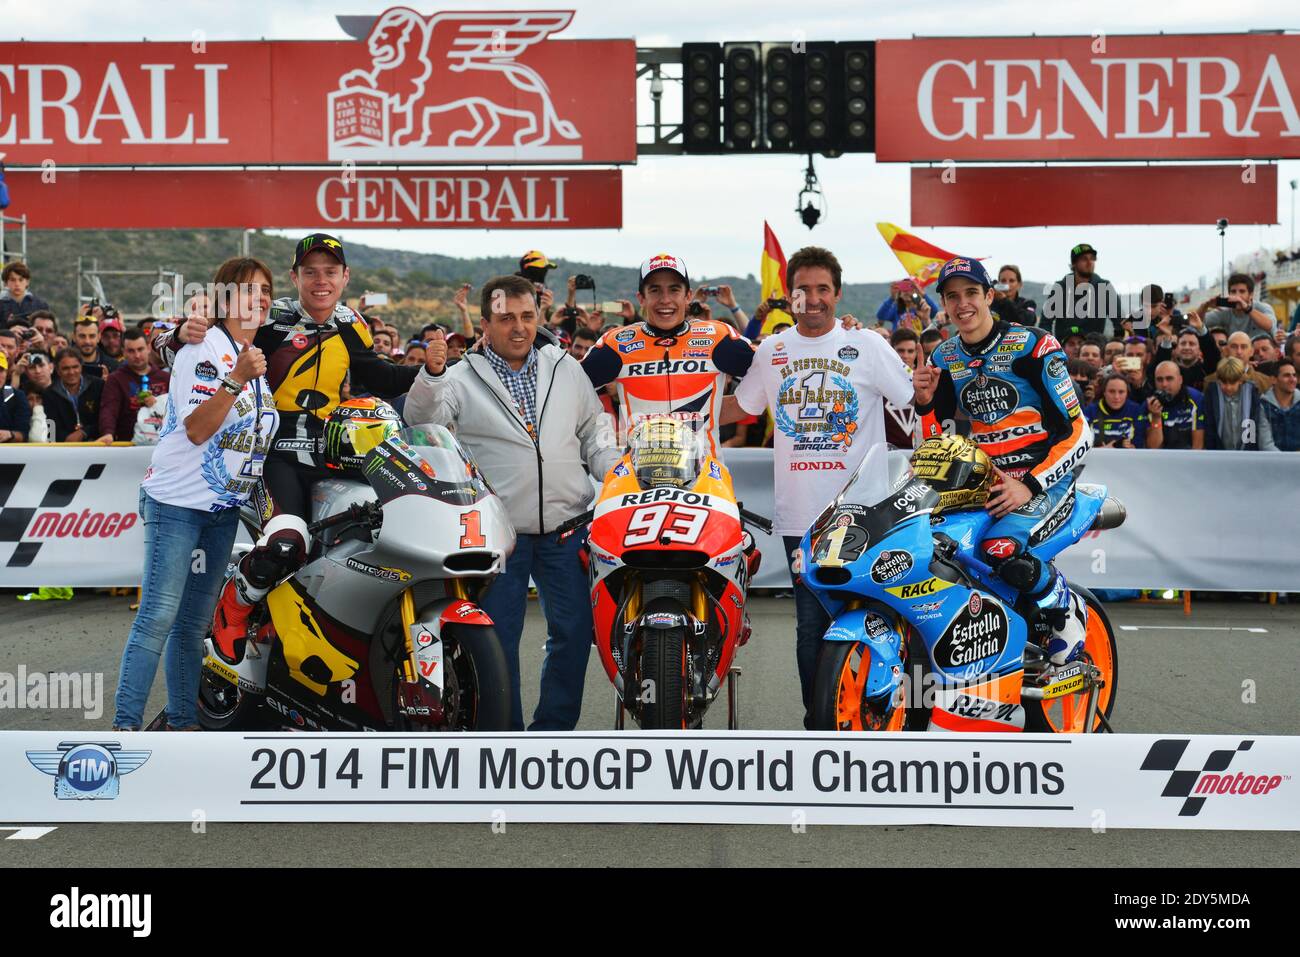 The 3 2014 World Championsfrom left, Tito Rabat, Spain Moto 2 World Champion,  Mark Marquez, Spain Moto GP World Champion, Alex Marquez, Spain, Moto 3  World Champion during the Moto GP Spain